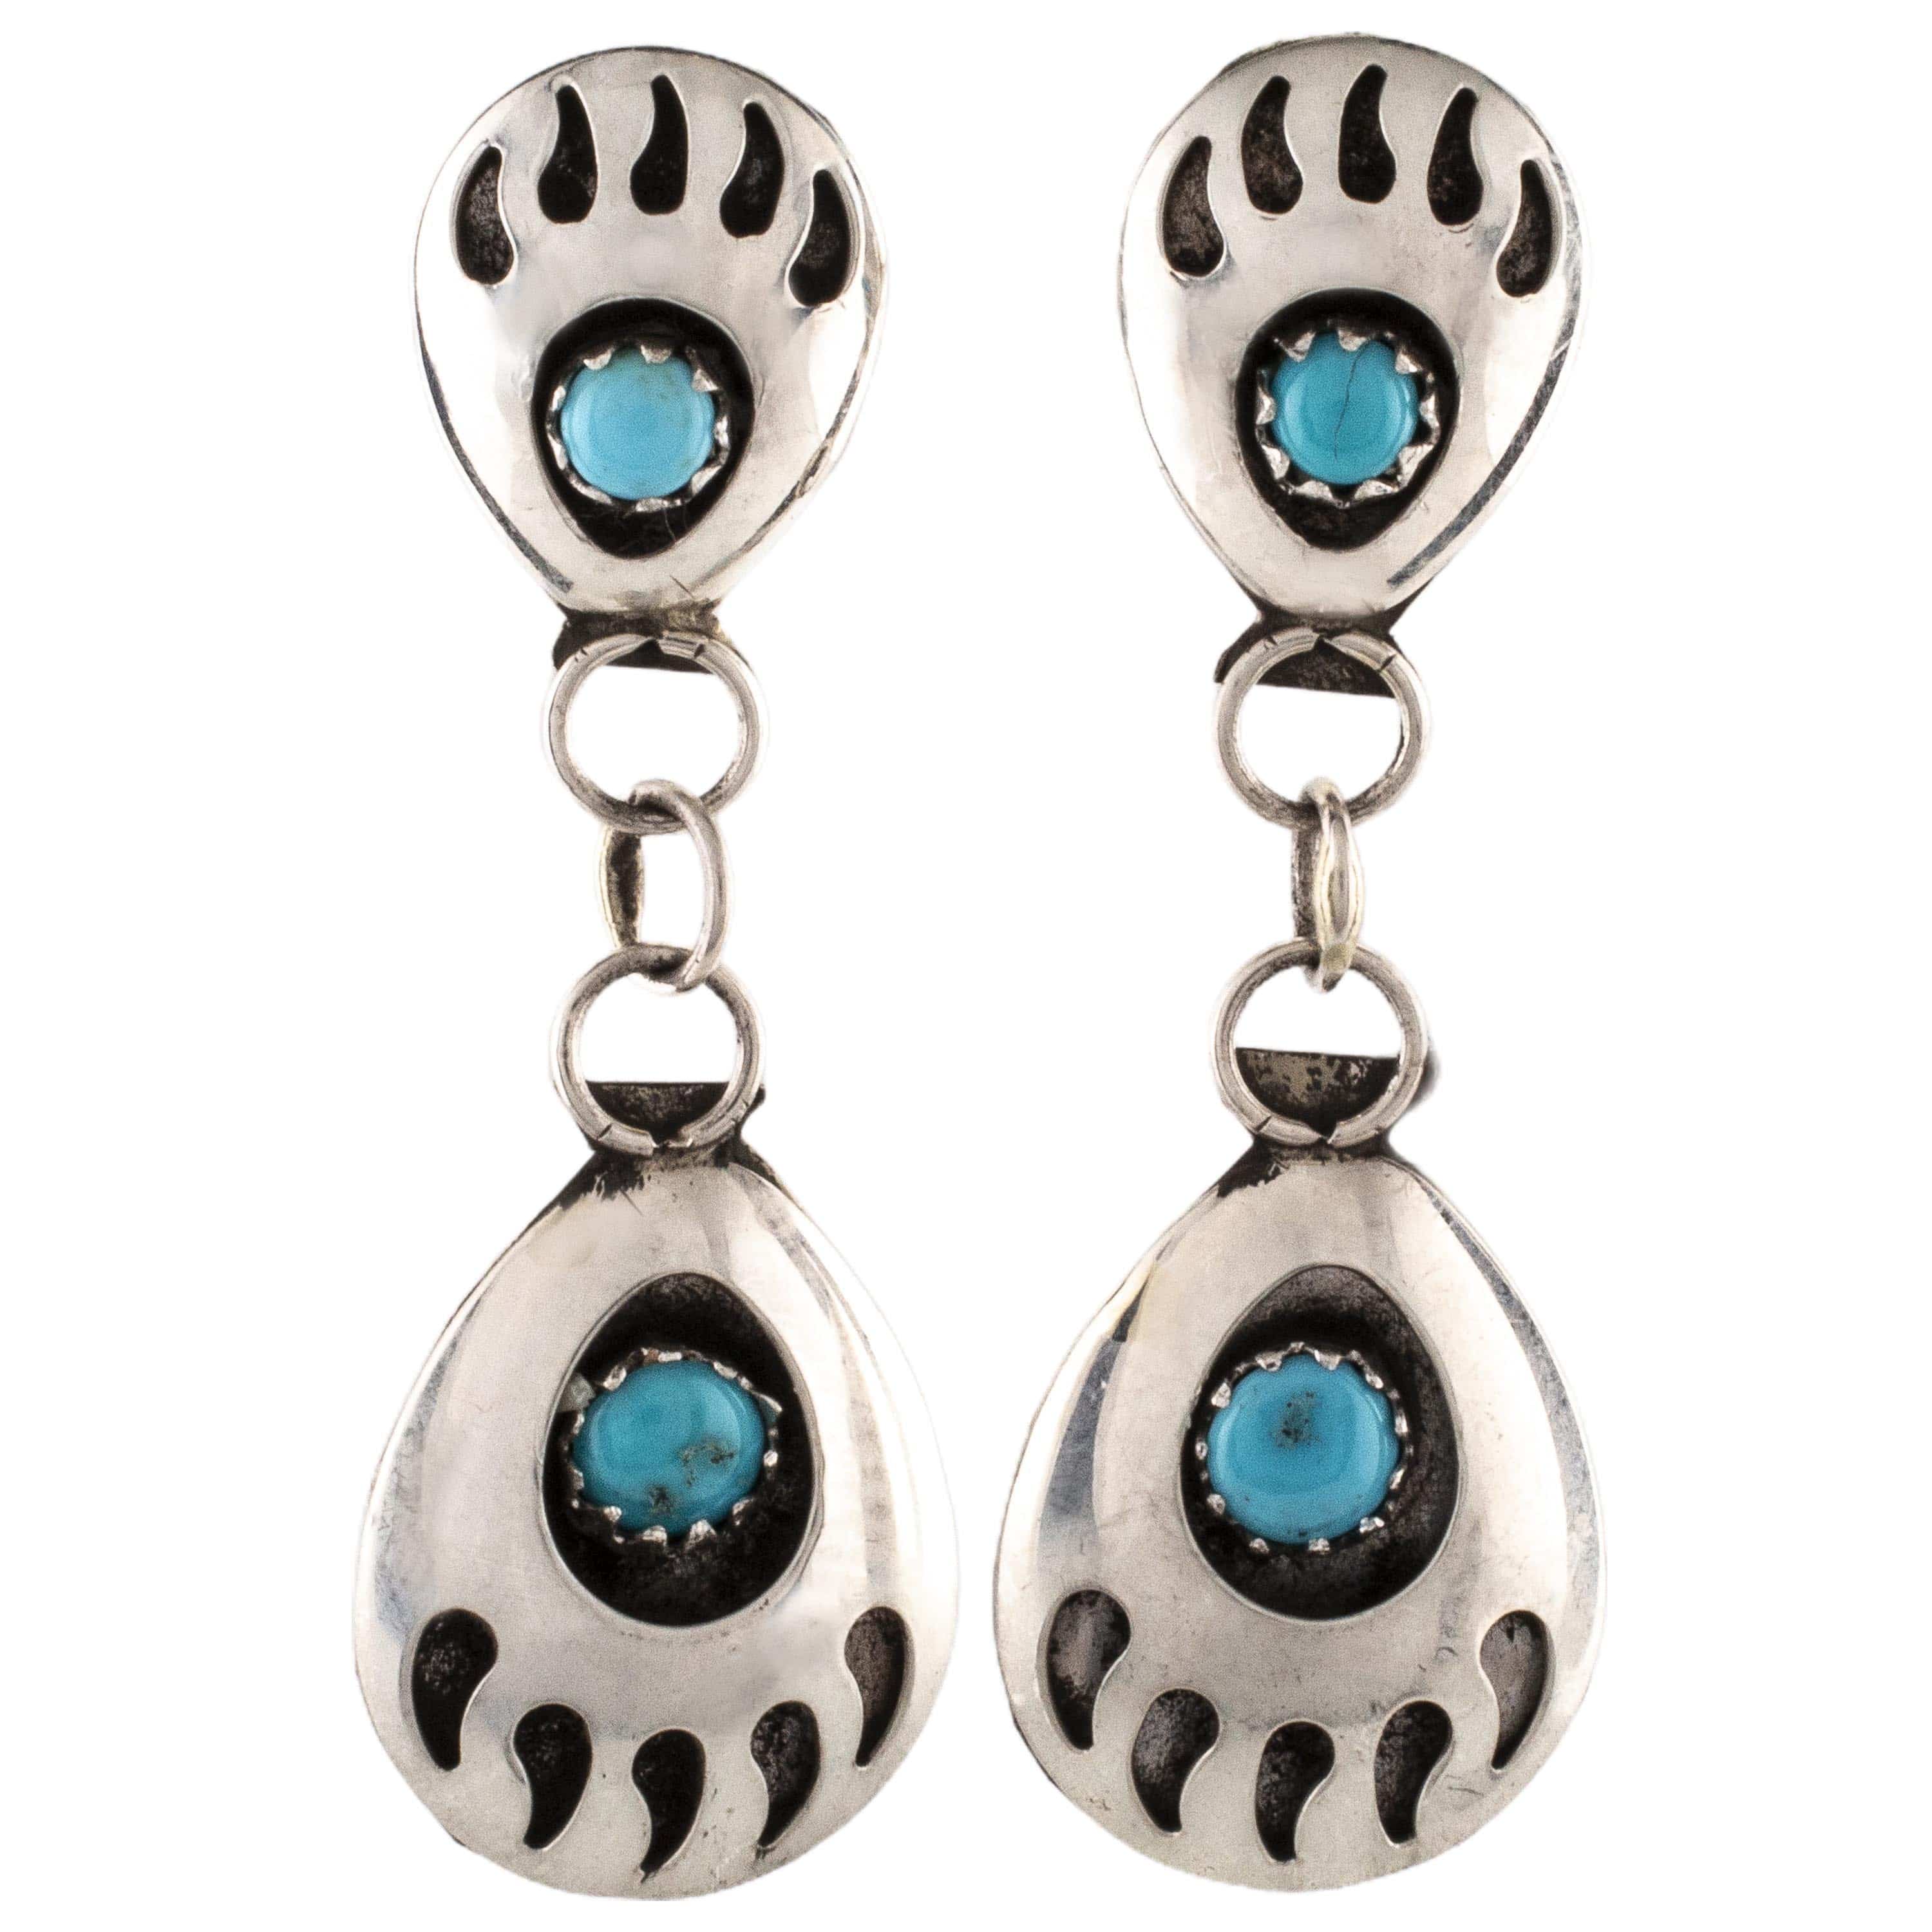 Kalifano Native American Jewelry Esther White Double Bear Claw with Turquoise Inlay USA Native American Made 925 Sterling Silver Dangly Earrings NAE150.011